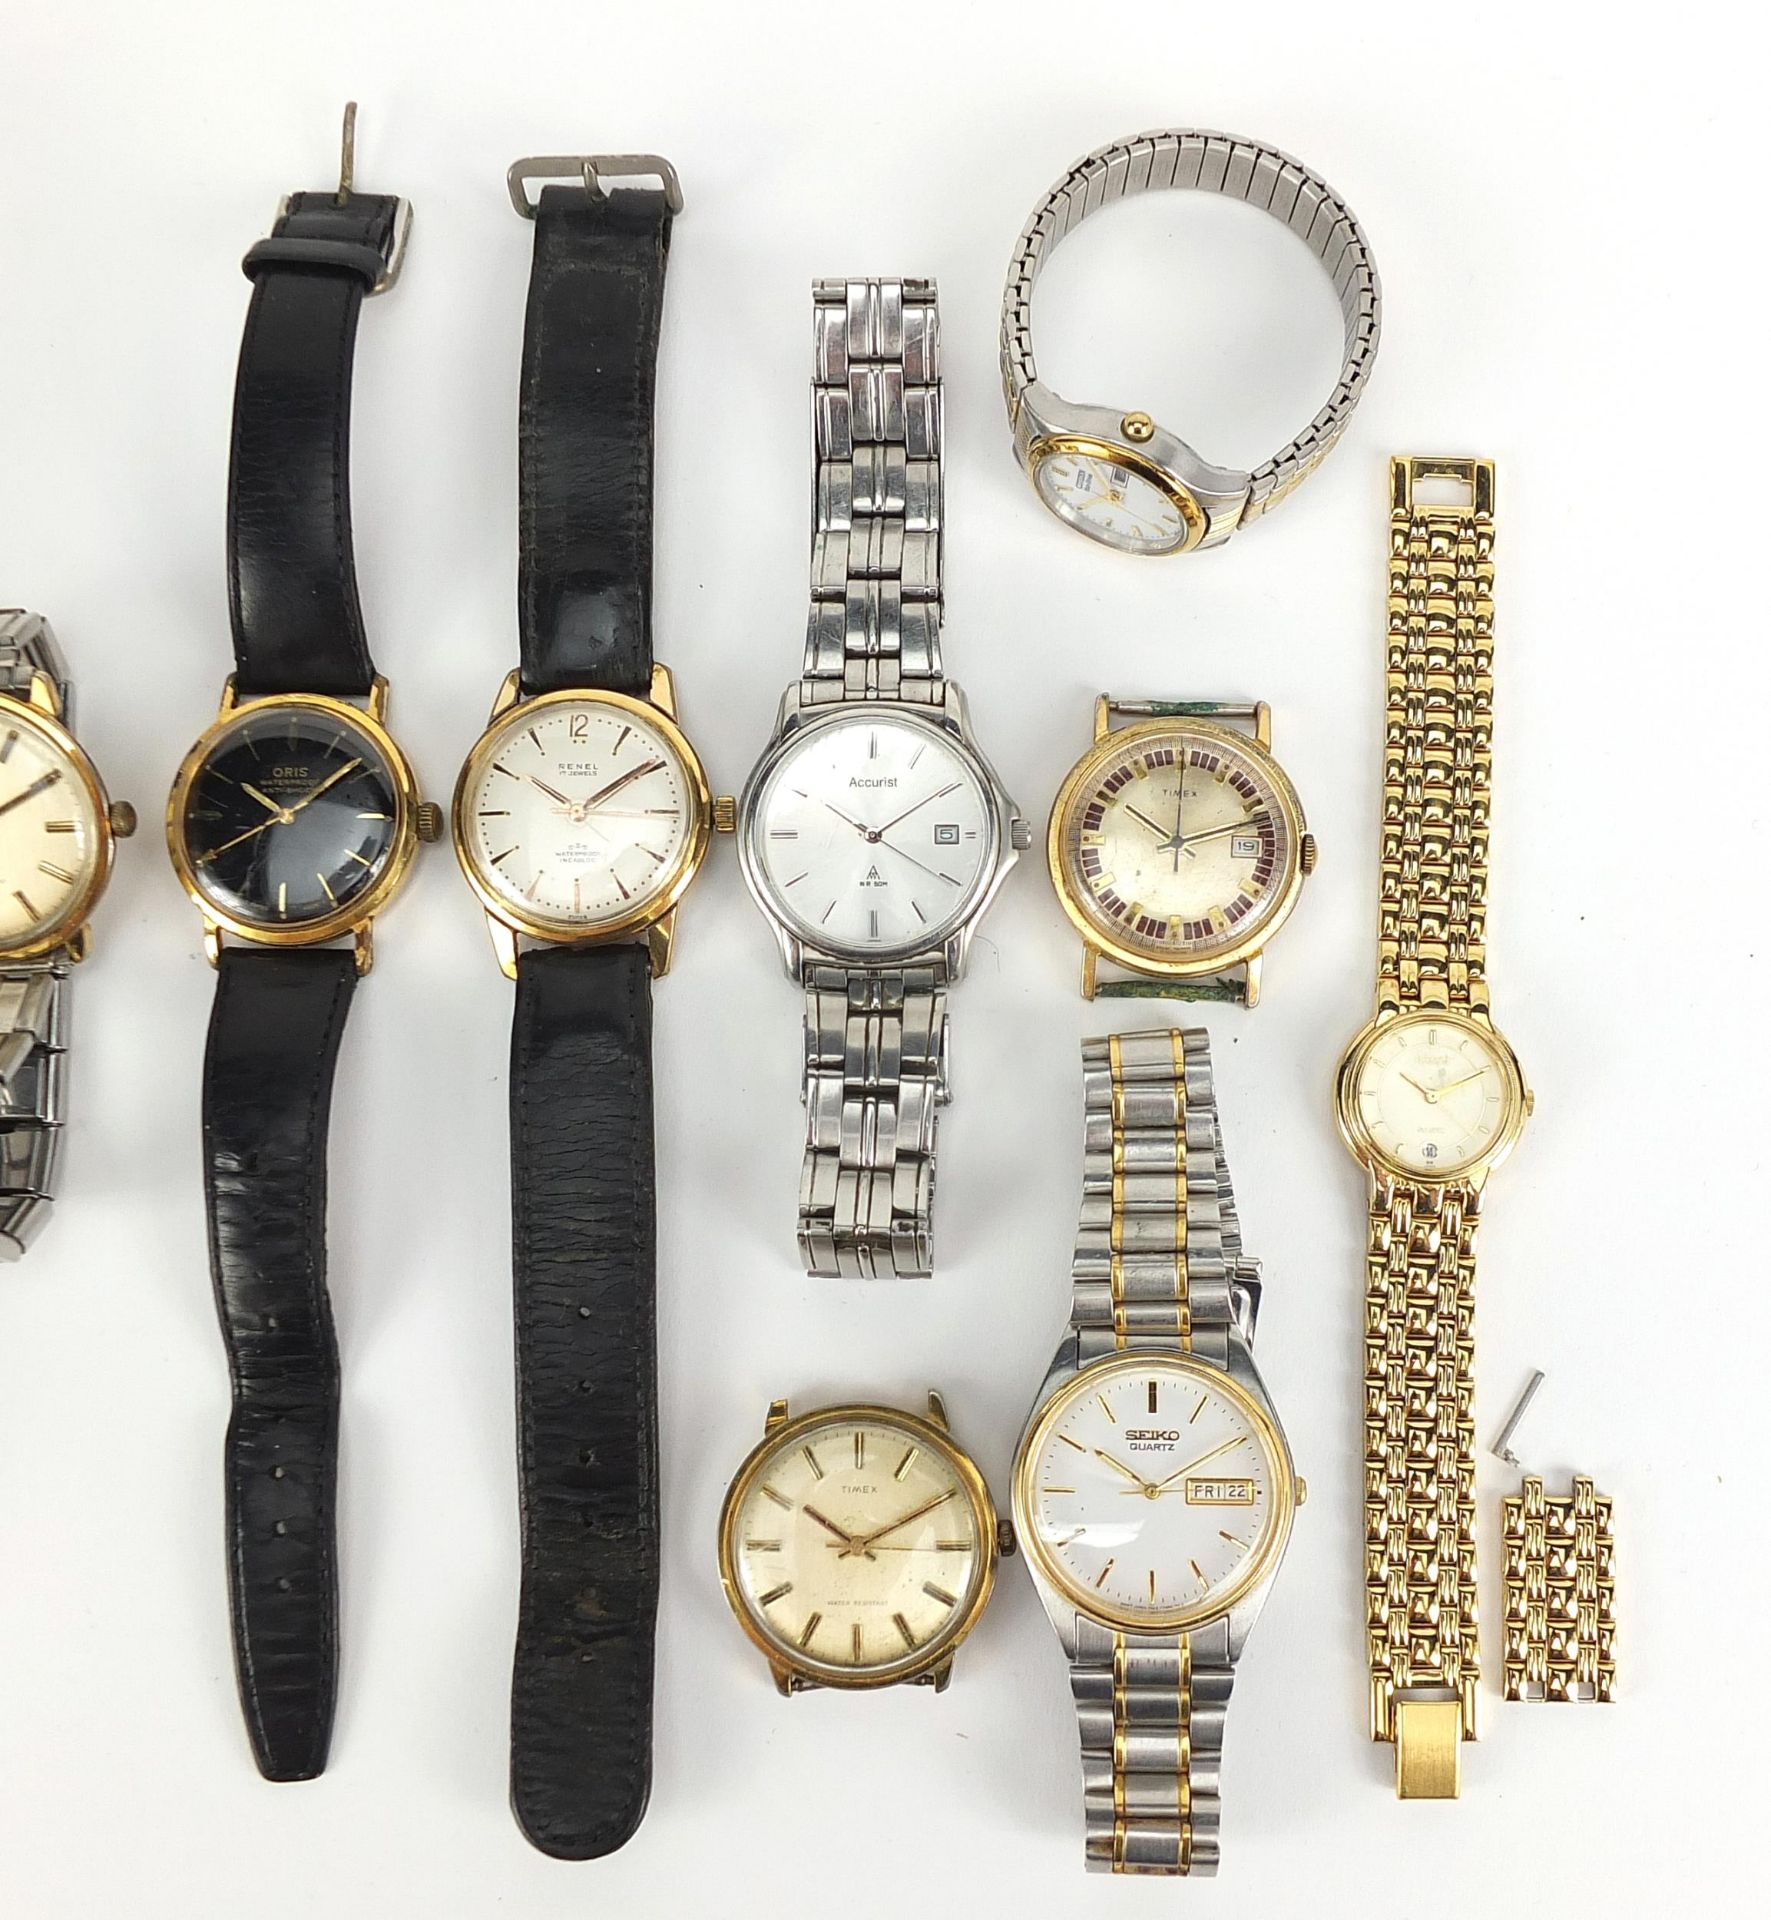 Vintage and later gentlemen's and ladies wristwatches including Renel, Timex, Seiko and Oris - Image 3 of 7